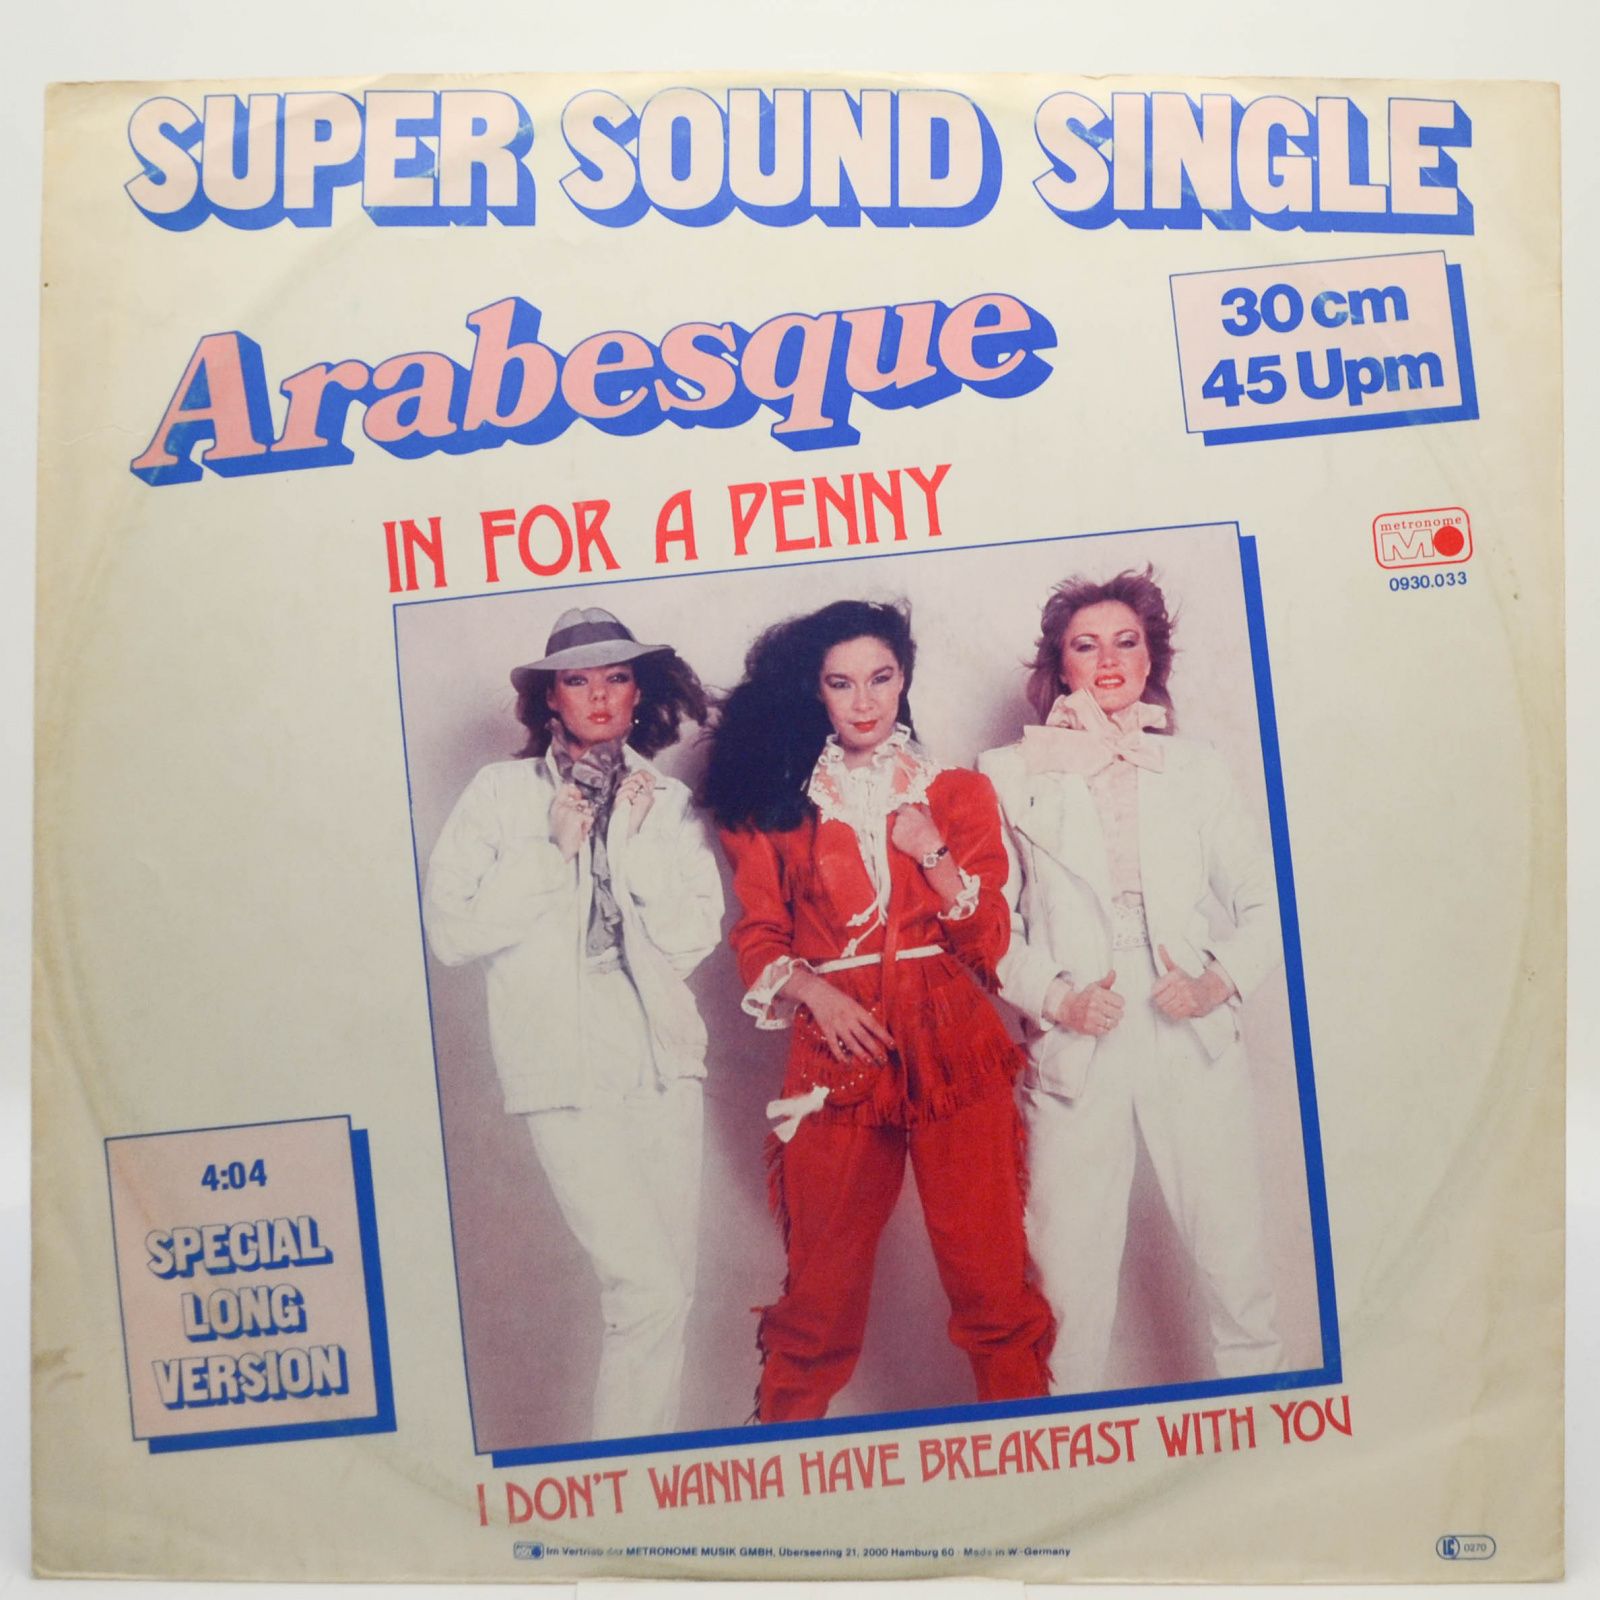 Arabesque — In For A Penny / I Don't Wanna Have Breakfast With You, 1981